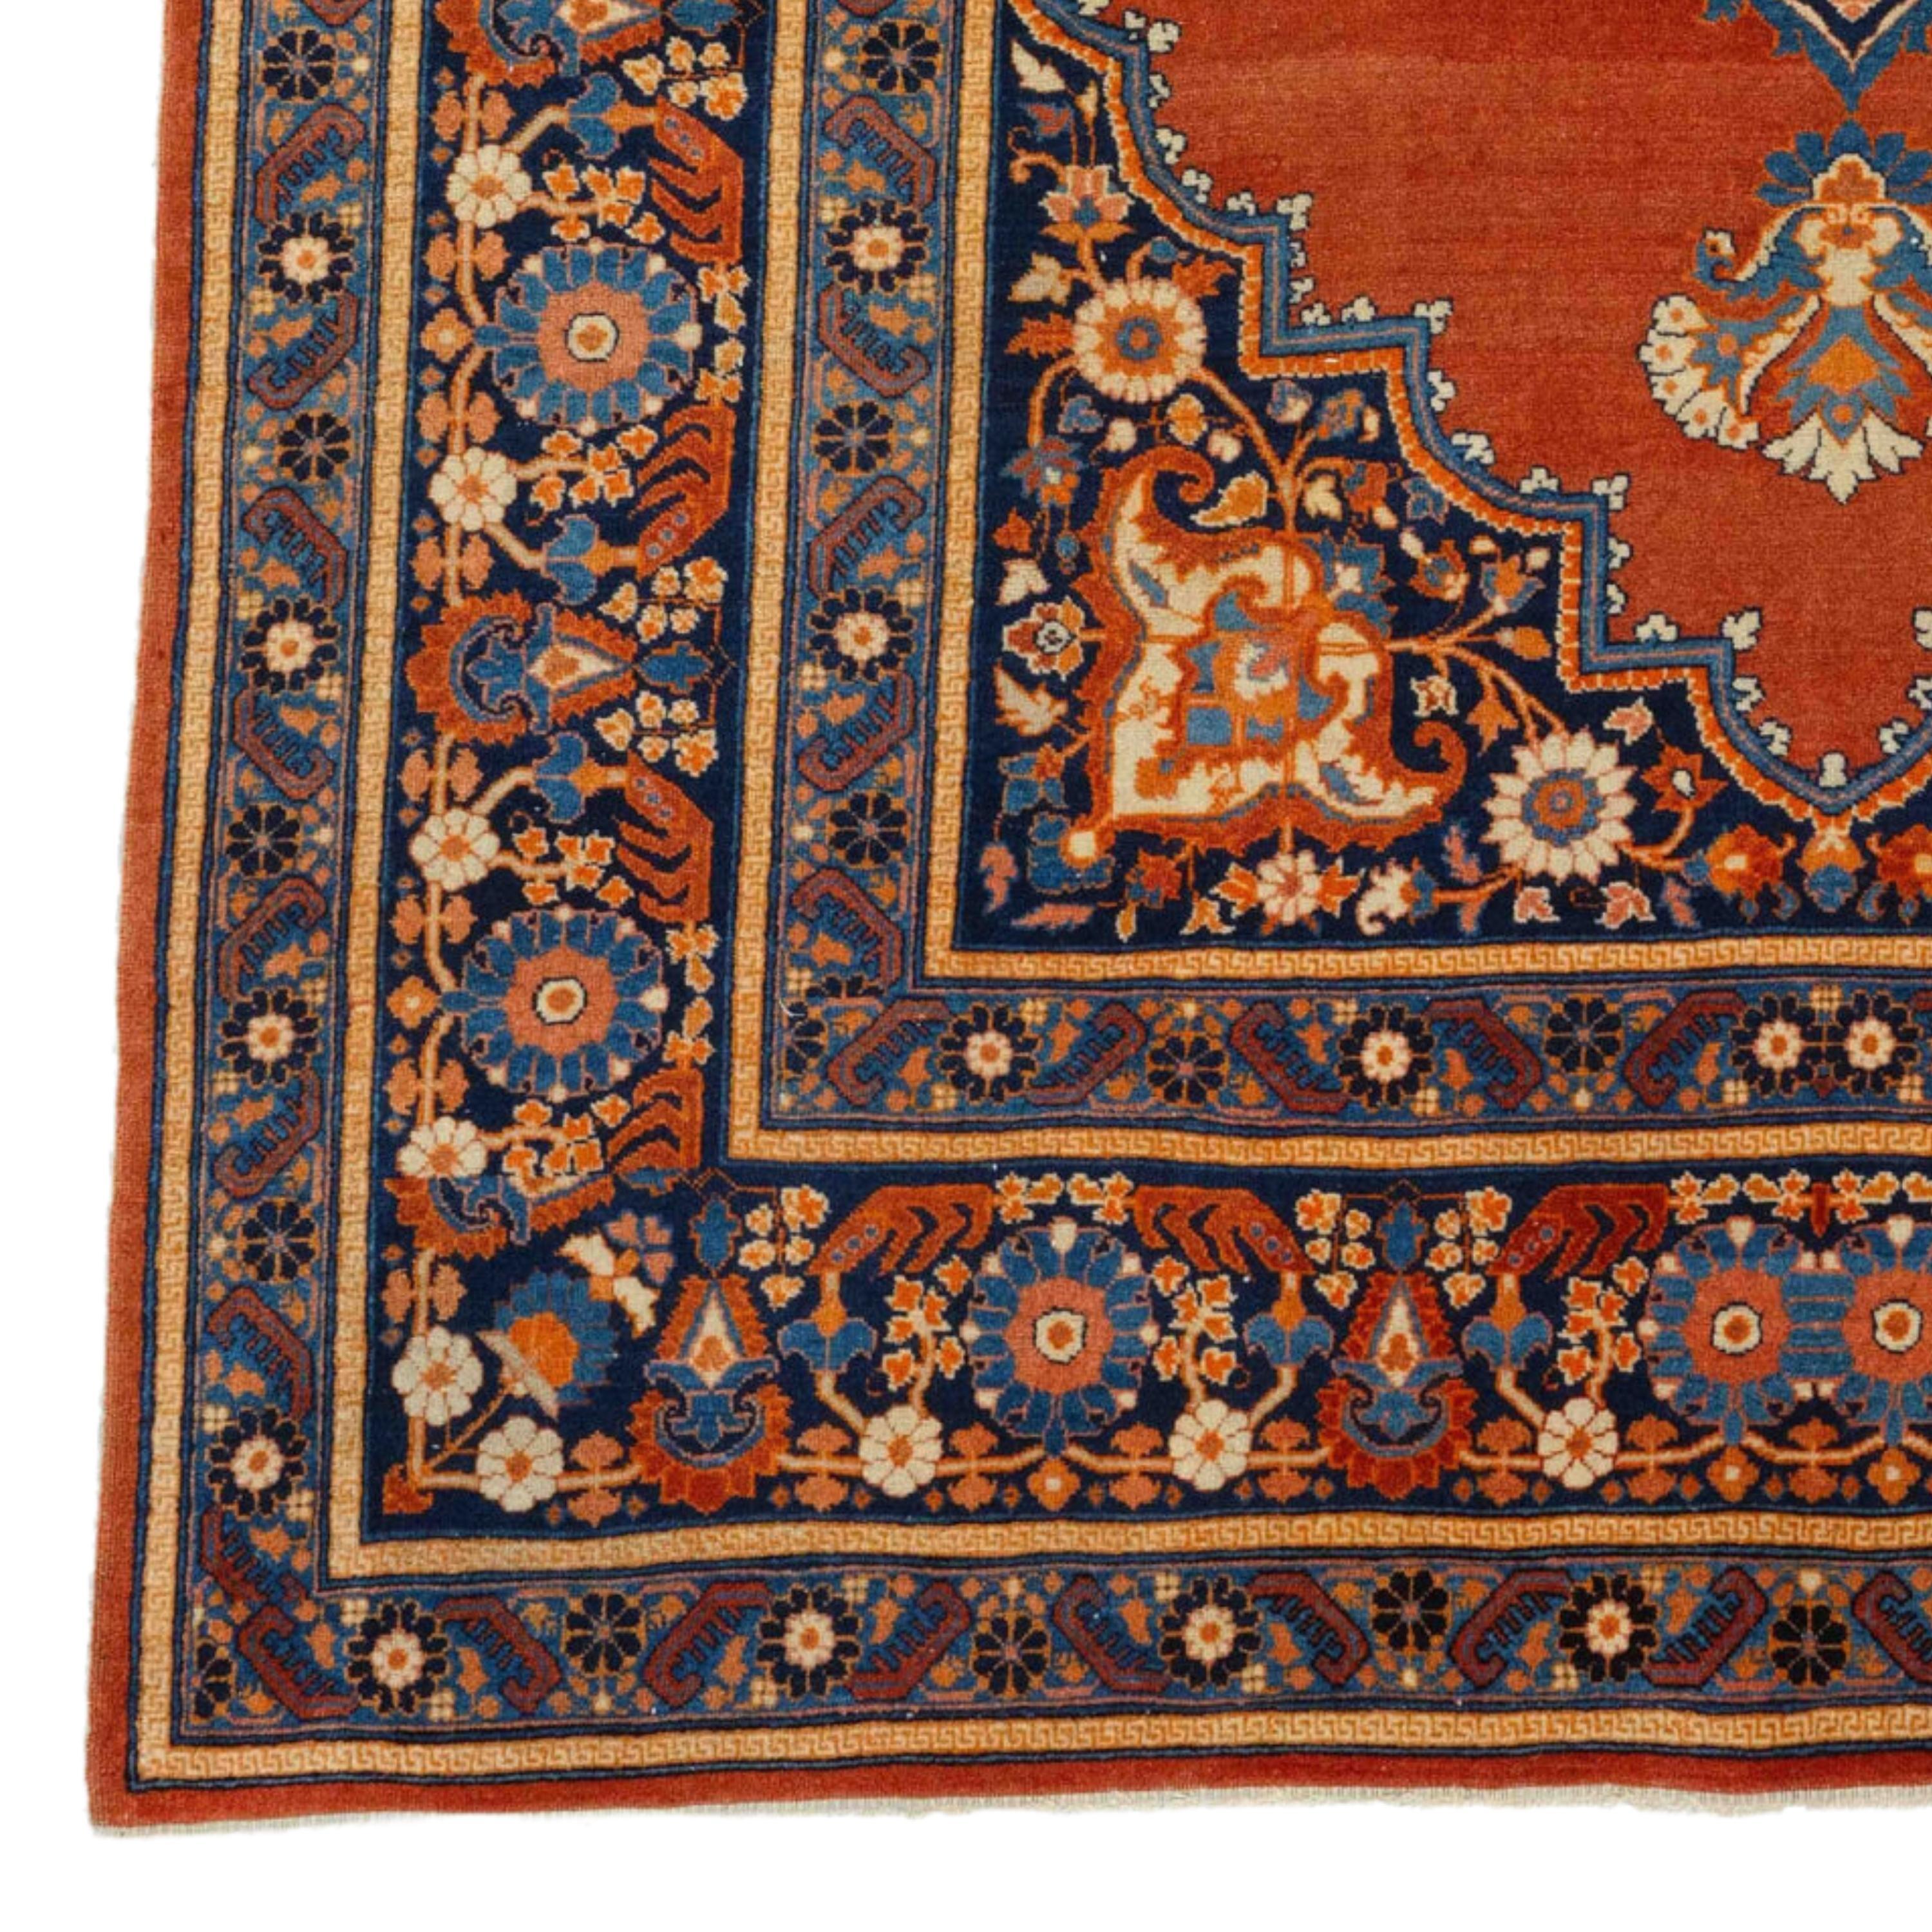 Antique Tabriz Rug  Persian Rug
Late Of 19th Century Tabriz Rug Generally Good Condition
Size 140 x 195 cm (55,1x76,7 In)

Experience the elegance of time and the depths of history. This antique Tabriz carpet from the late 19th century is a rare and